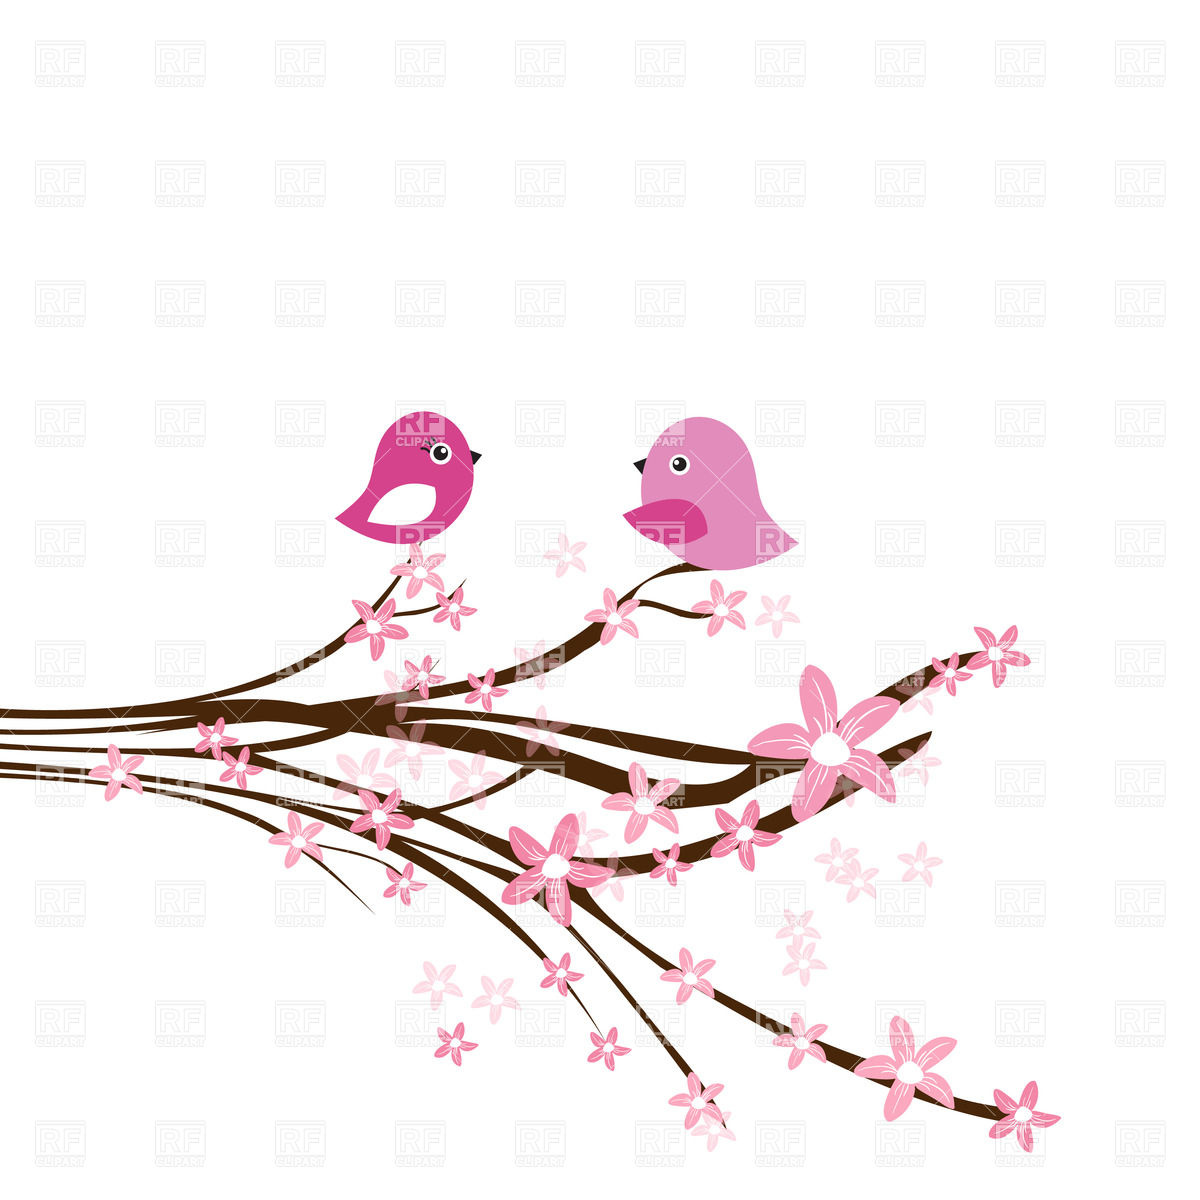 Cherry Blossom Branch With Two Cute Pink Birds Download Royalty Free